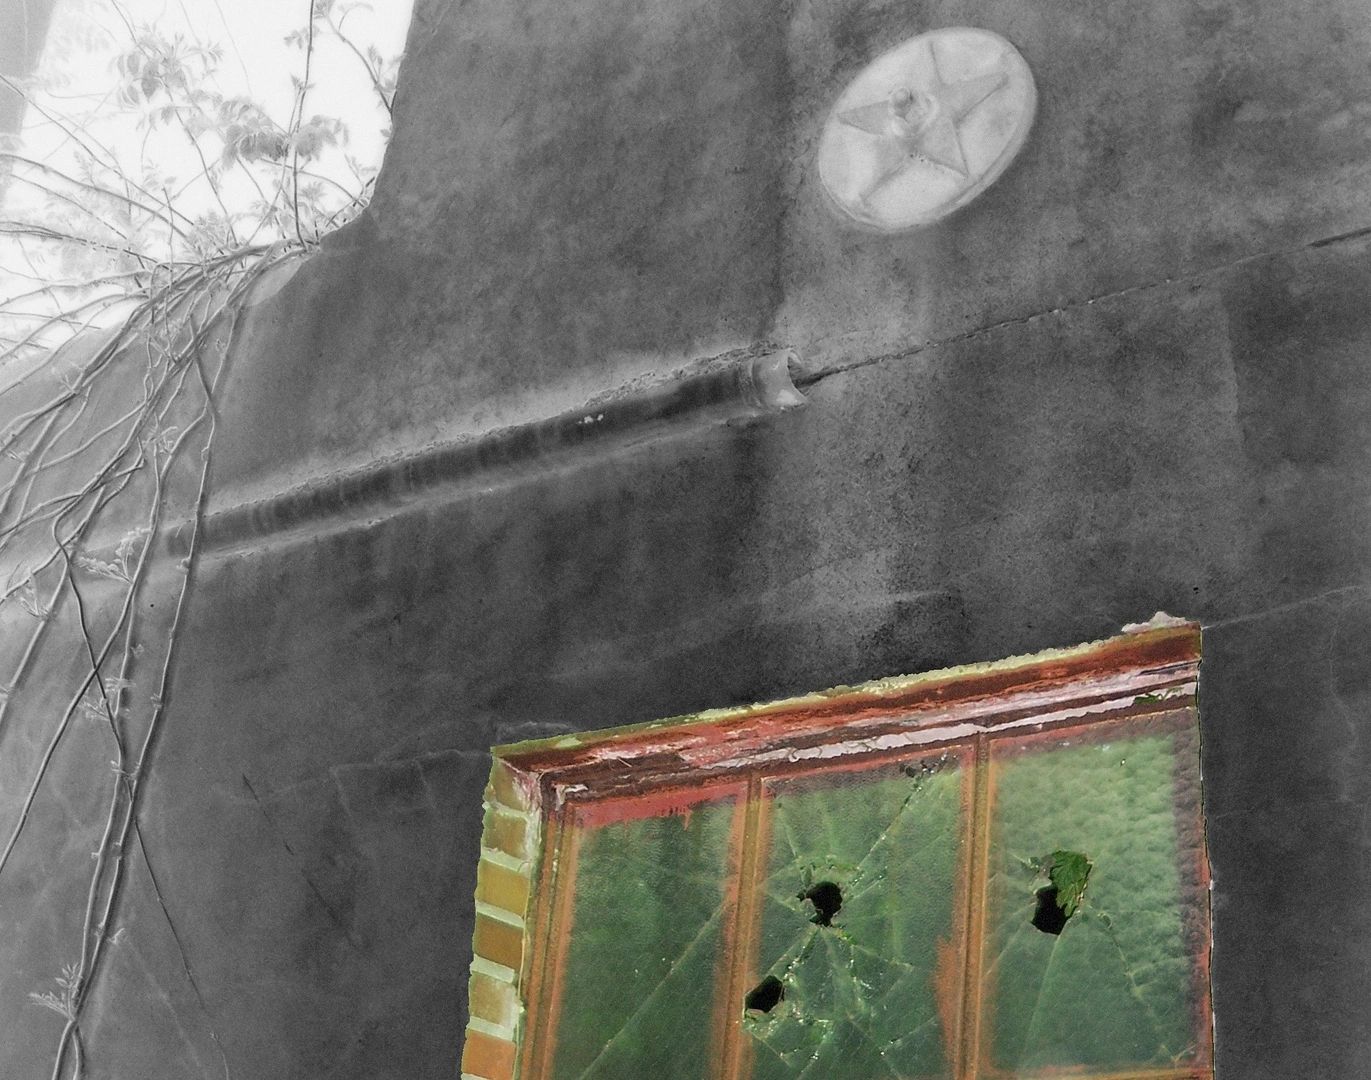 broken window in haunted house from ghost tour